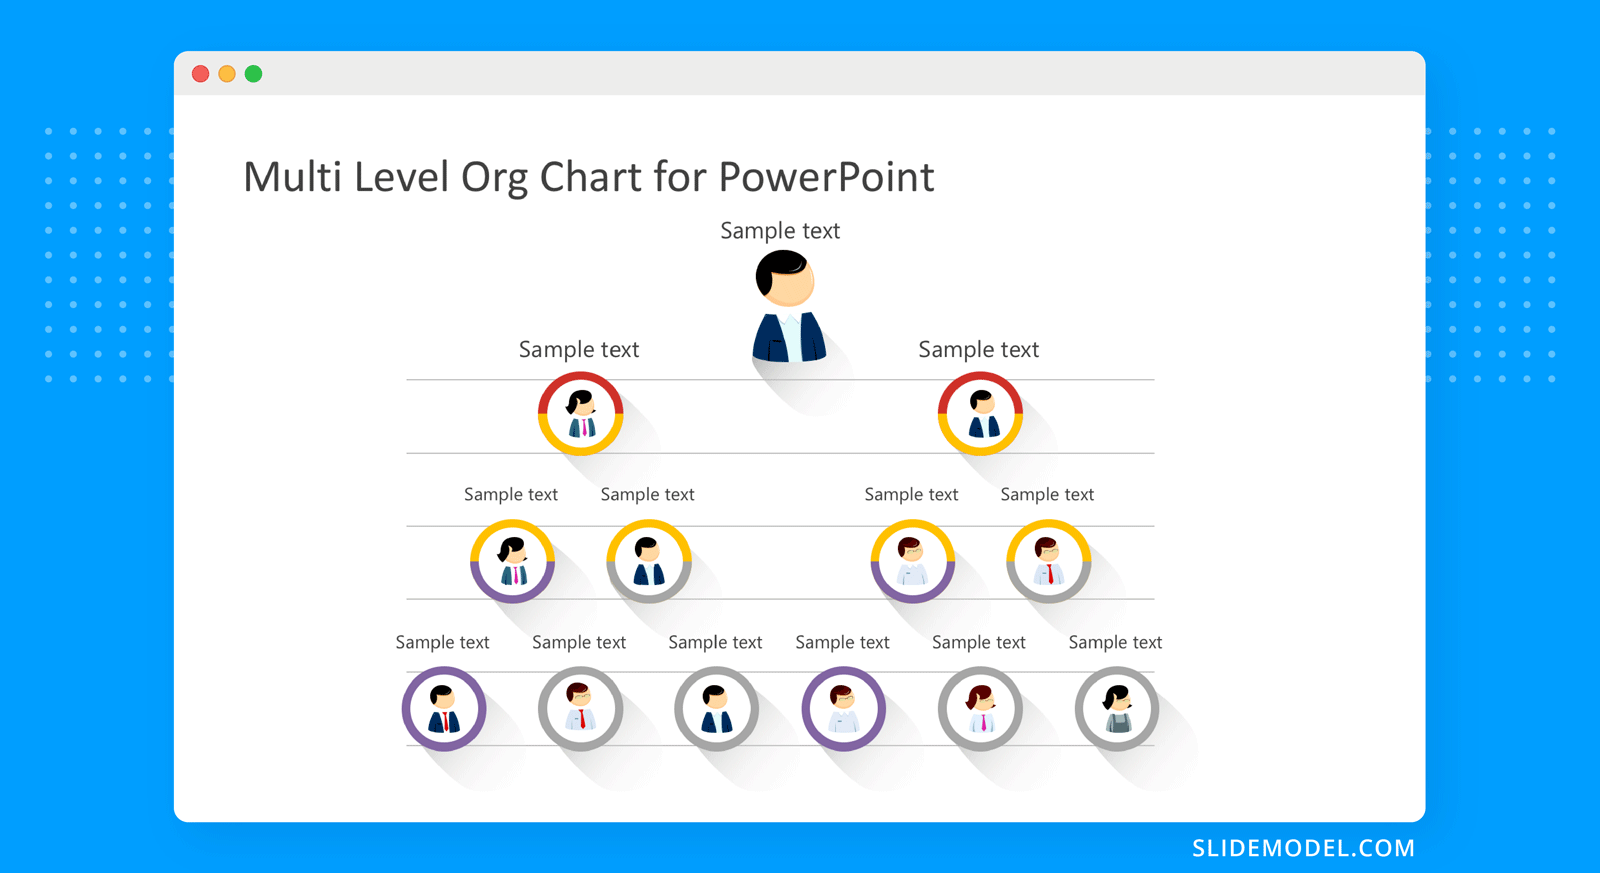 Multi-level org chart PowerPoint template design